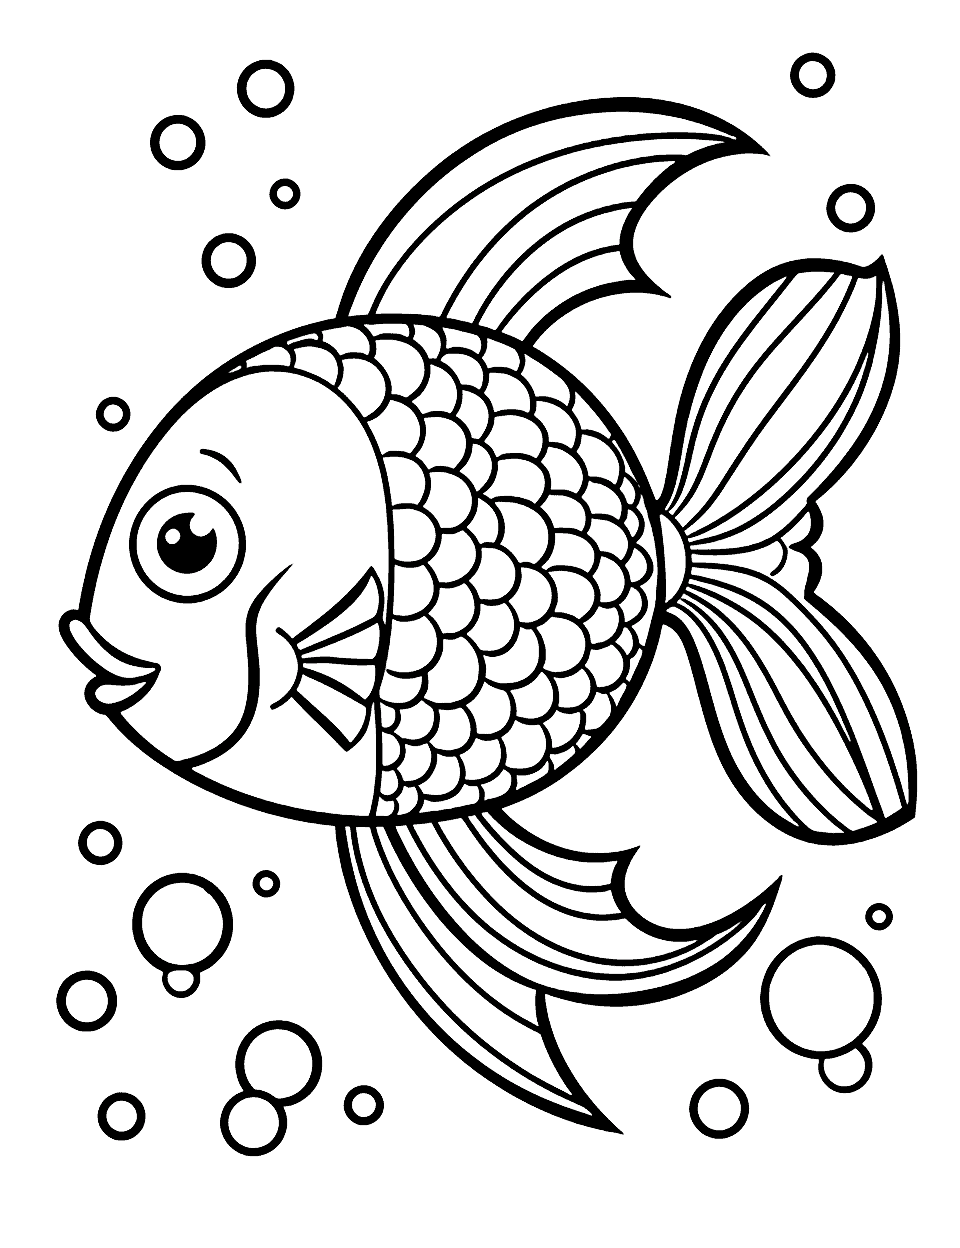 Whimsical Fish Designs Coloring Page - Abstract fish design with swirls, and stripes for kids to color.